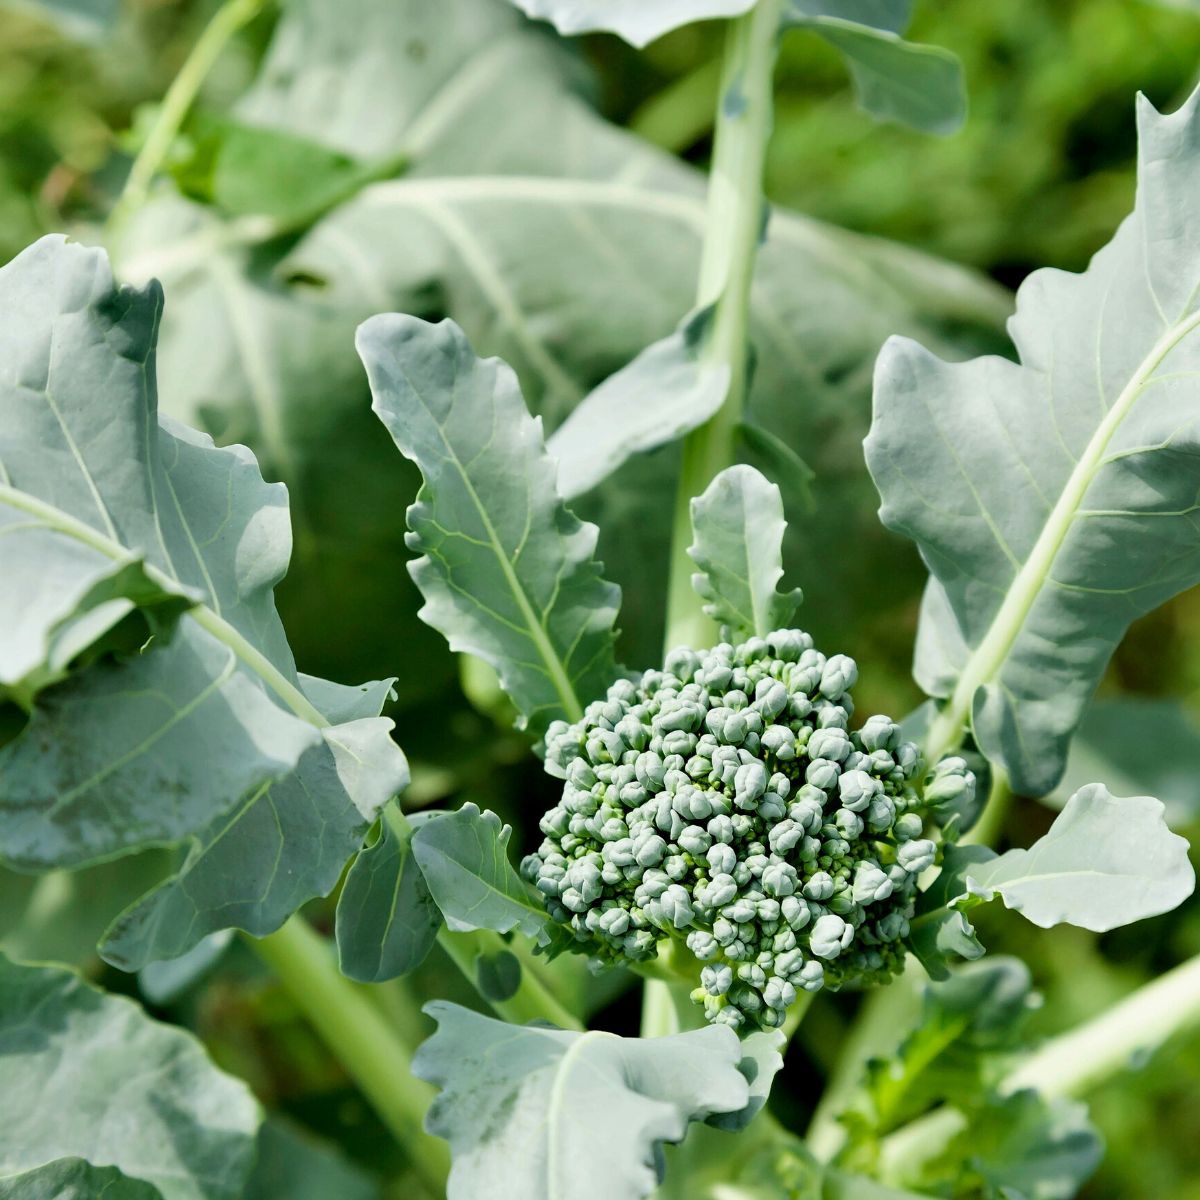 broccoli plant growing in the grden